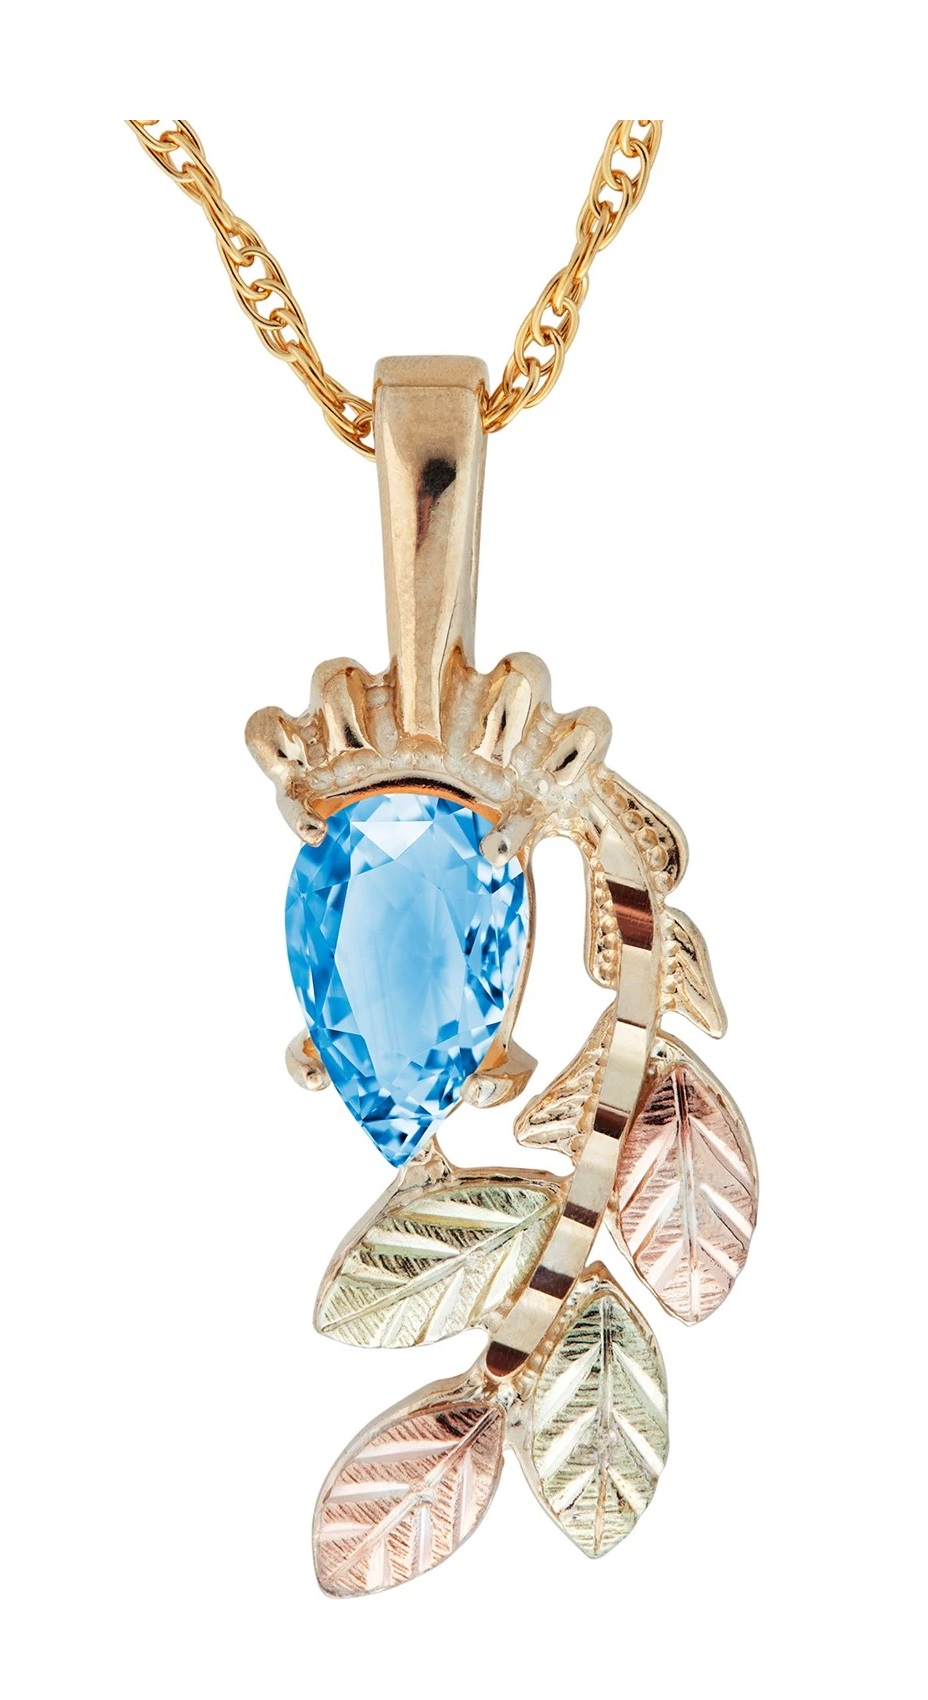 10K Yellow Gold Blue Topaz Pear Shaped Pendant Necklace